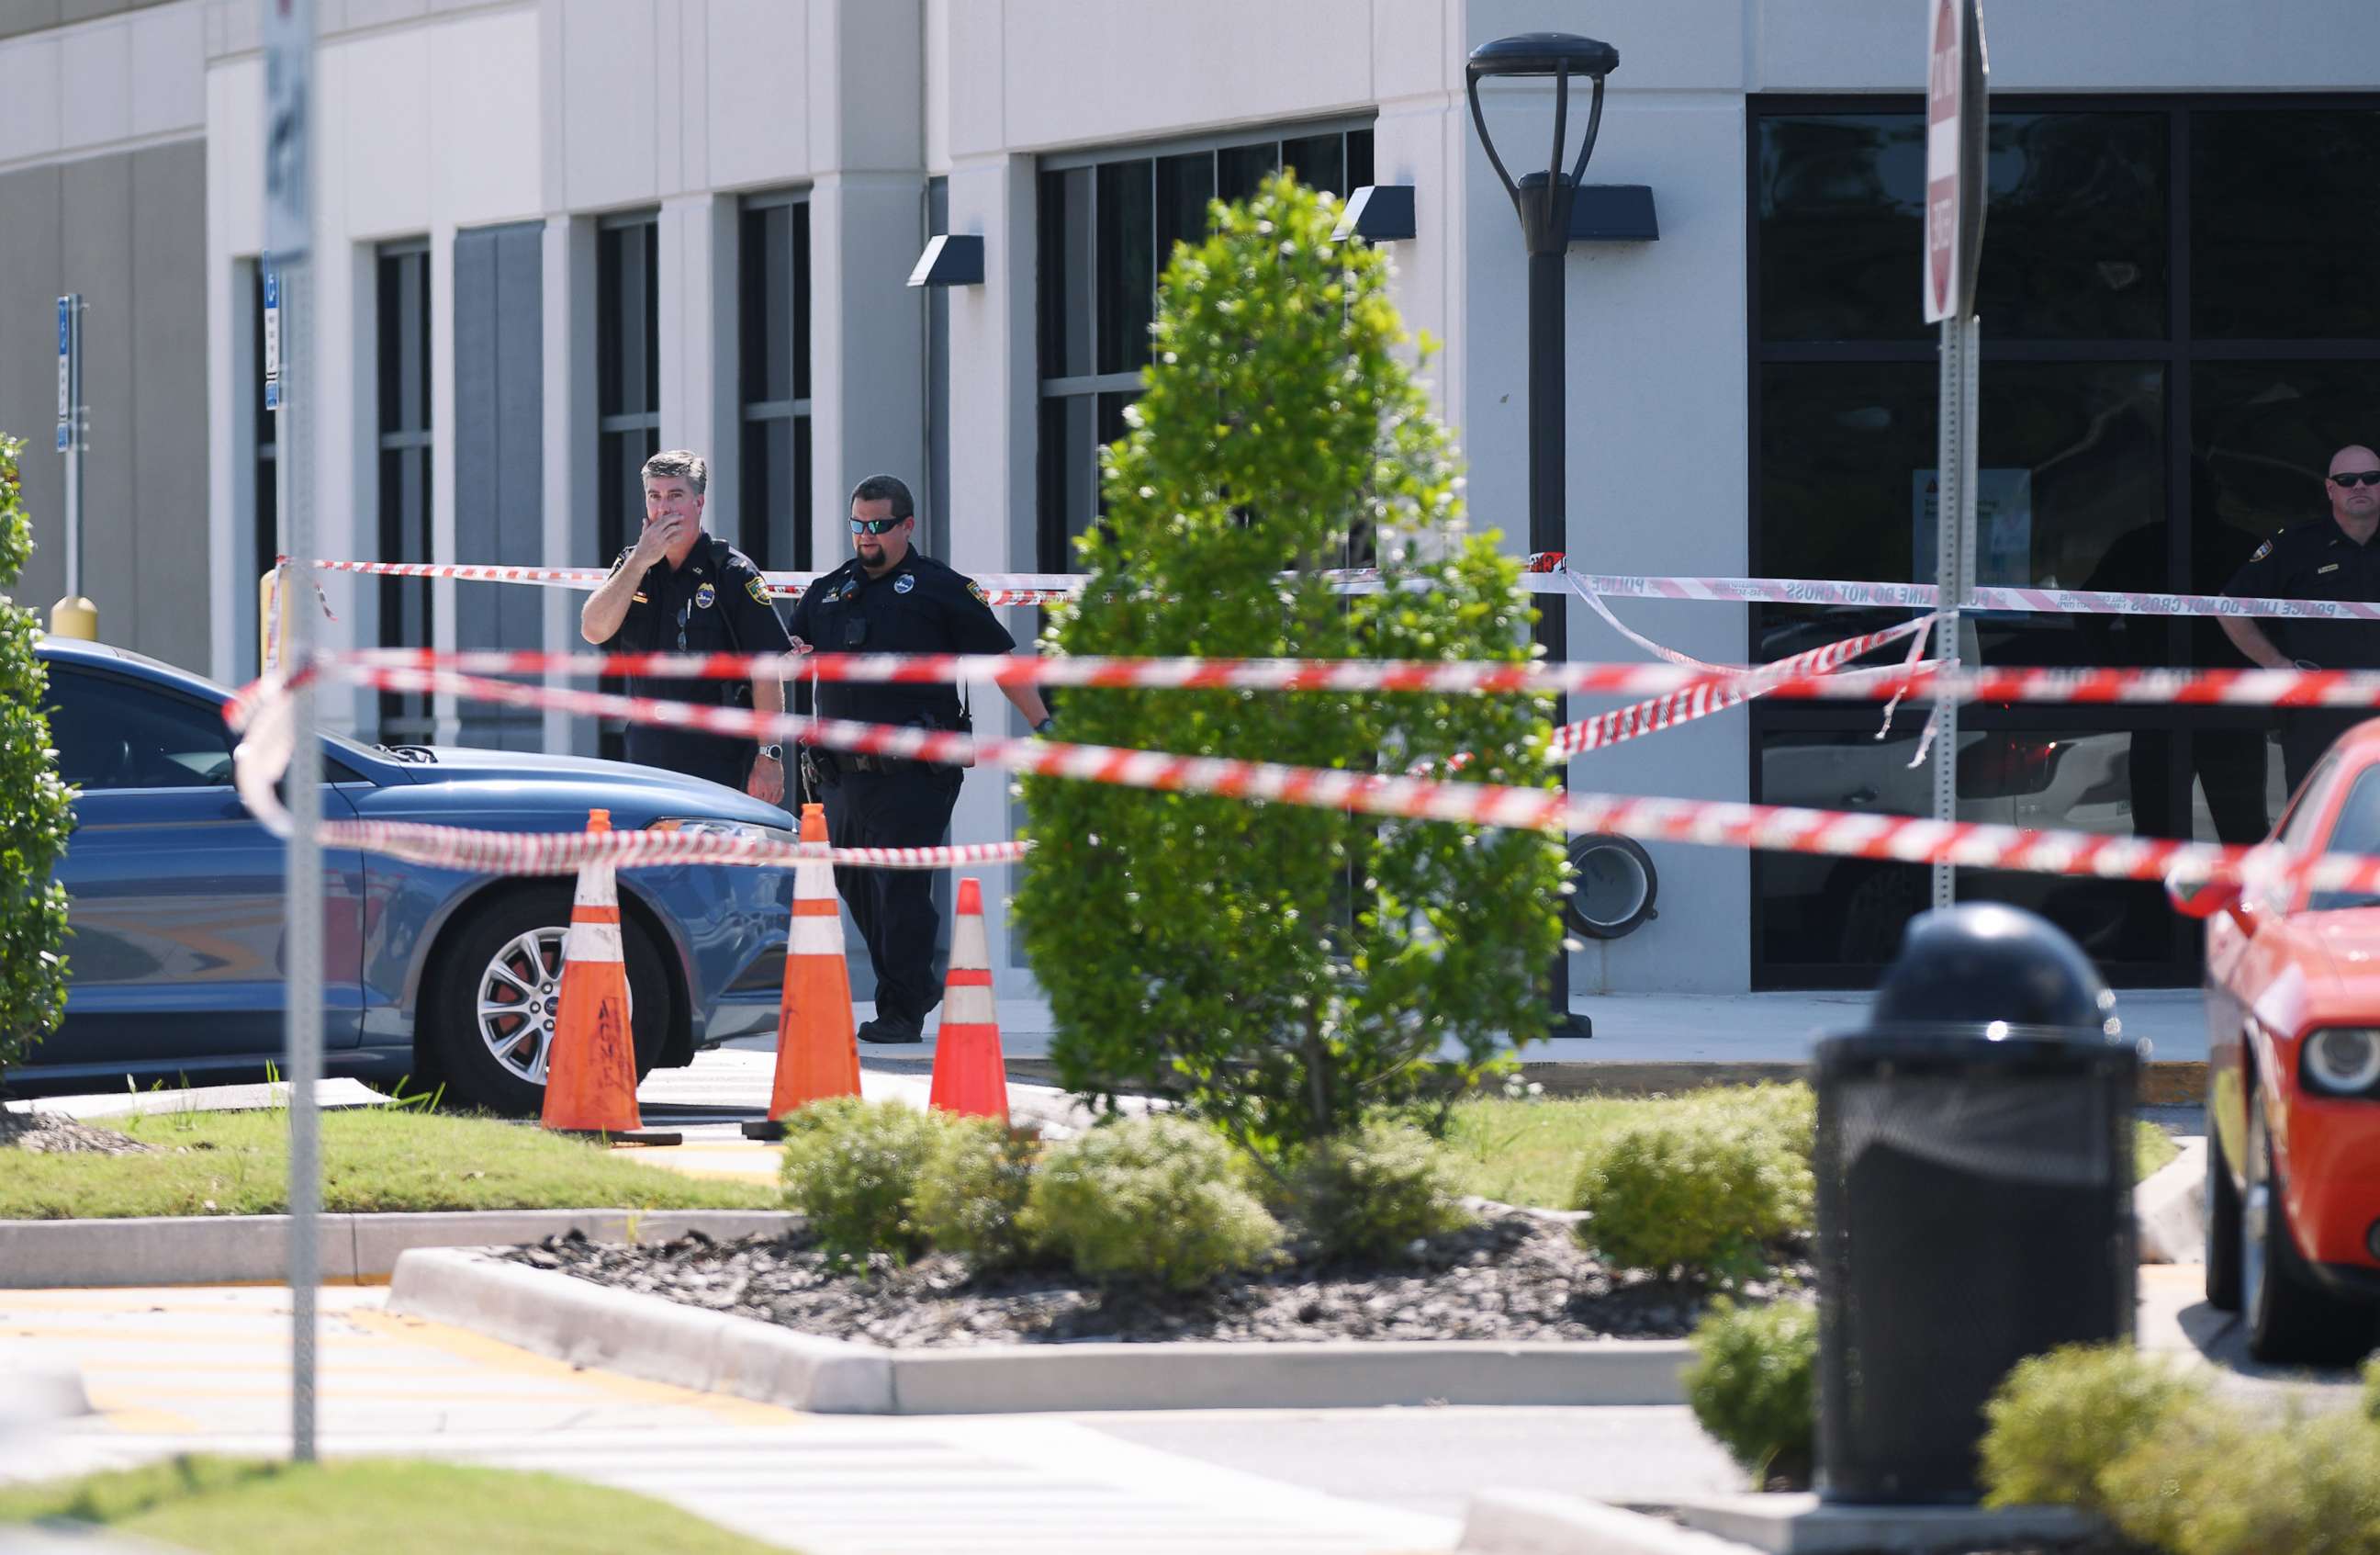 PHOTO: Crime scene tape is seen at the corner of the Amazon fulfillment center as law enforcement responds to a report of a shooting in Jacksonville, Fla., June 29, 2020.